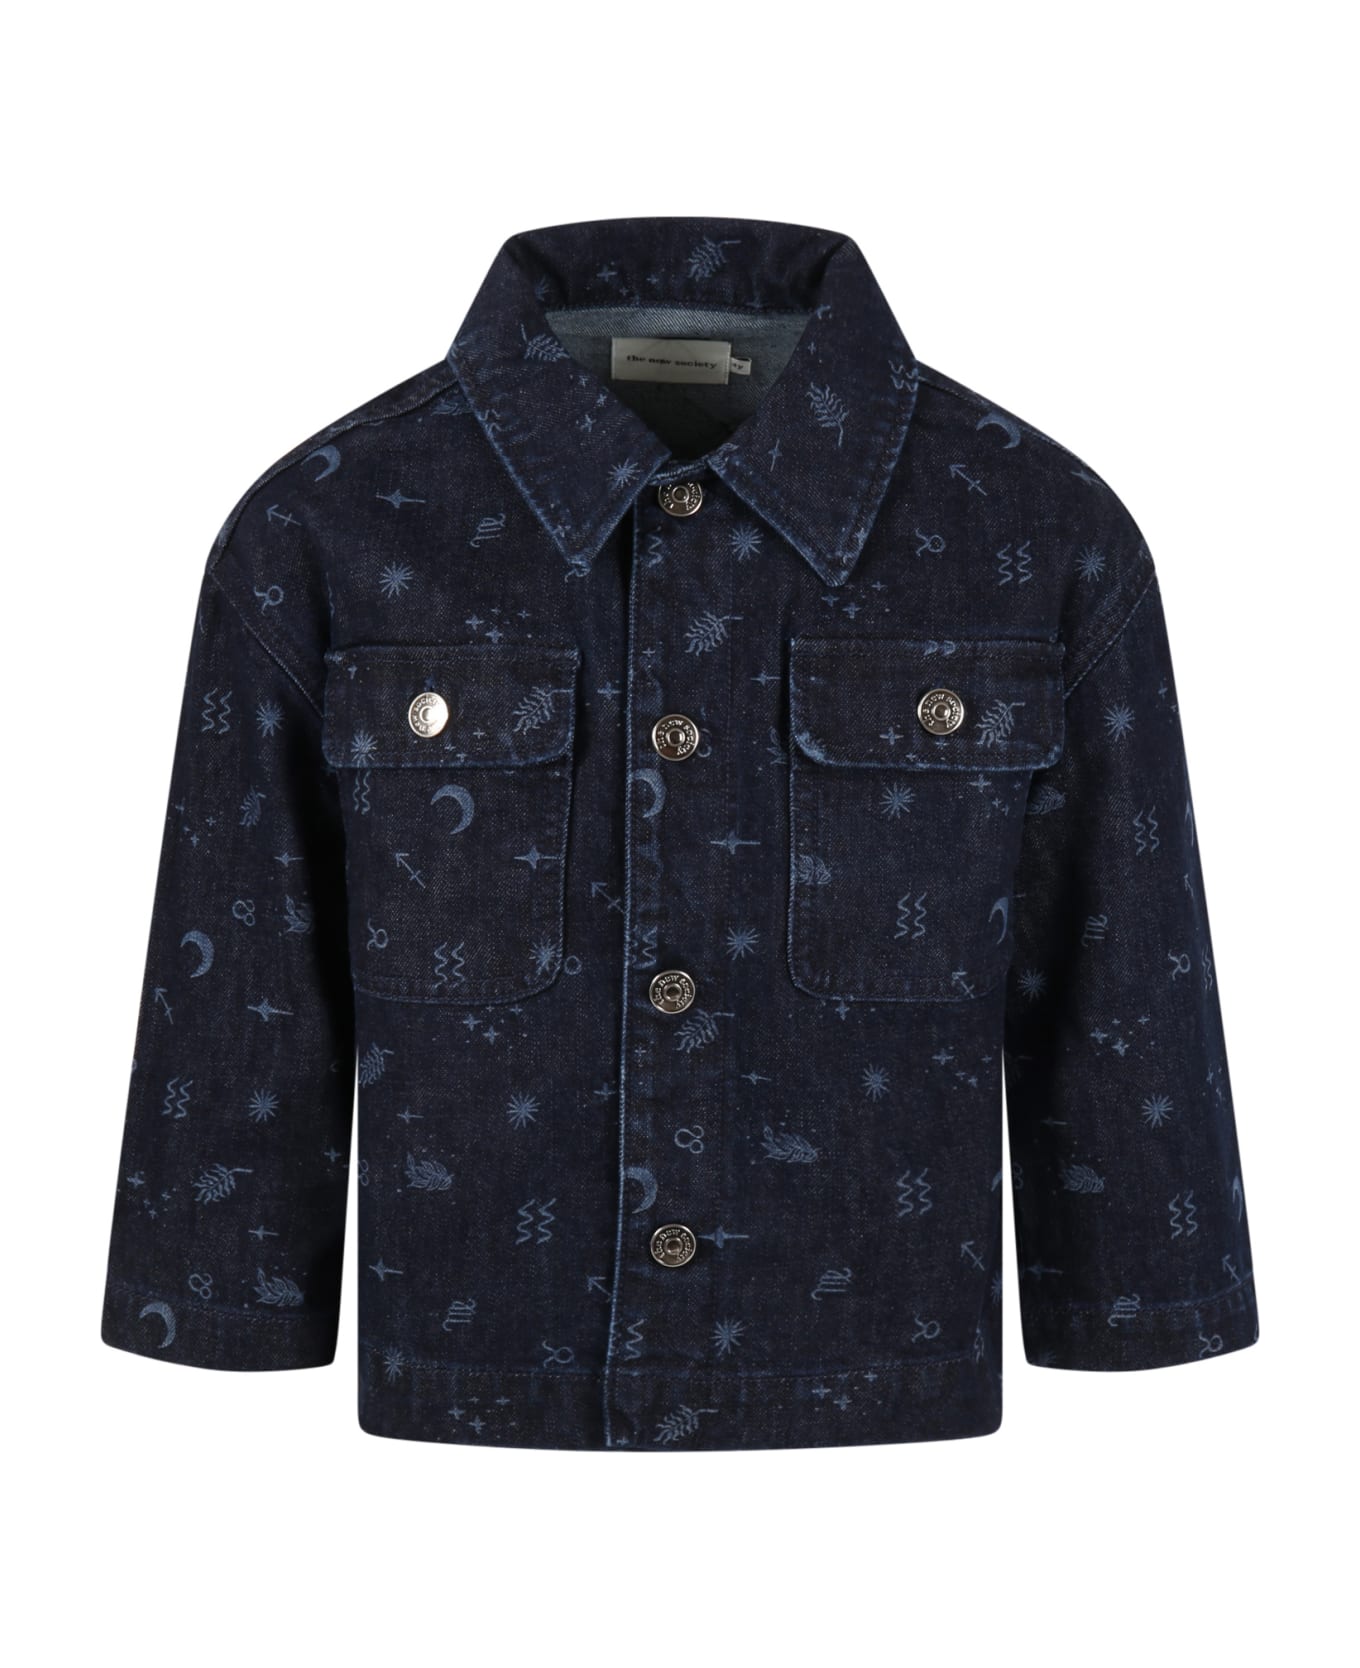 The New Society Blue "cosmos" Shirt For Kids With Zodiac Symbols - Blue